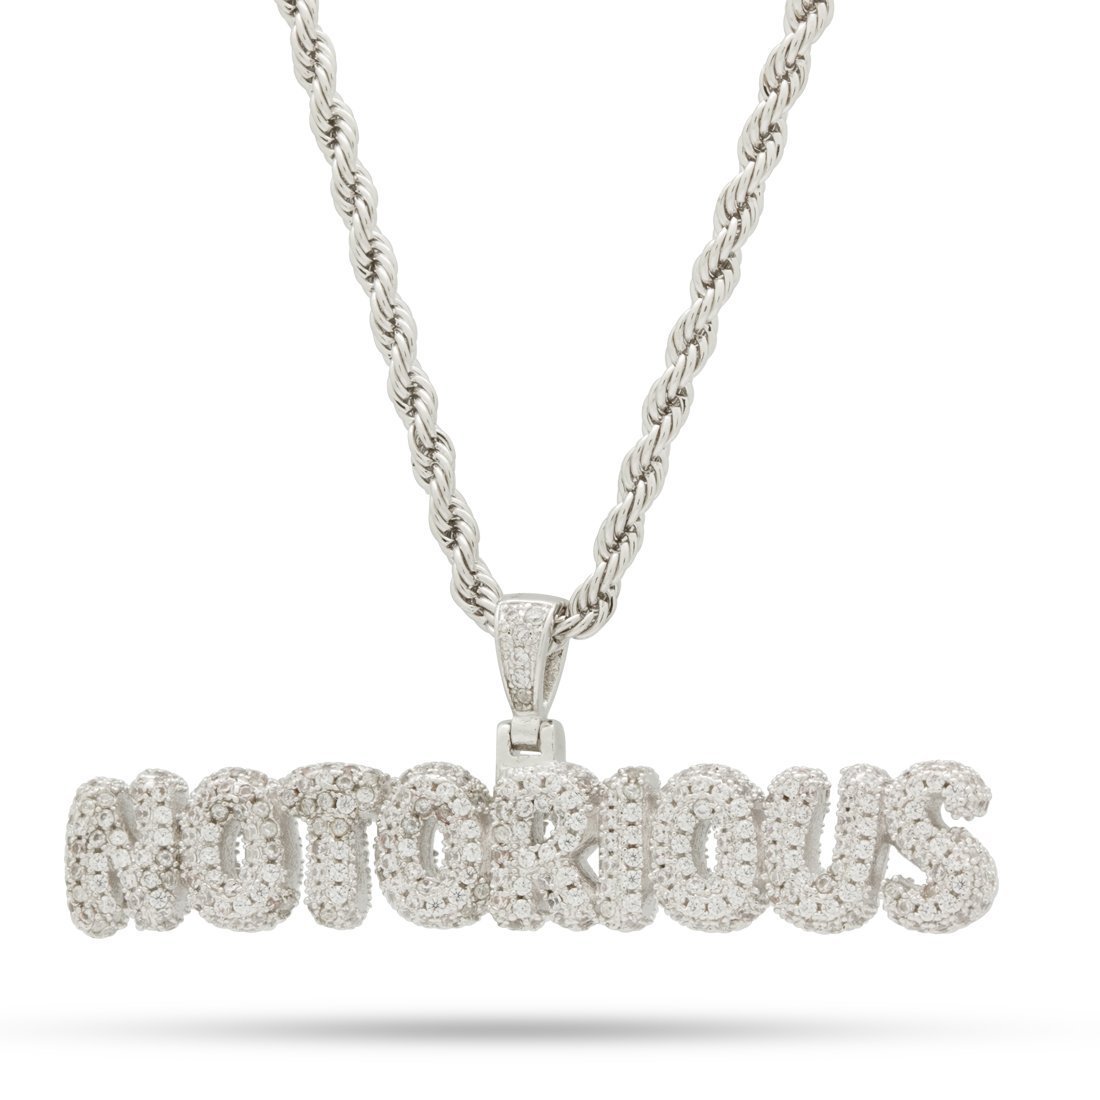 White Gold / M Notorious B.I.G. x King Ice - Notorious Necklace NKX14093